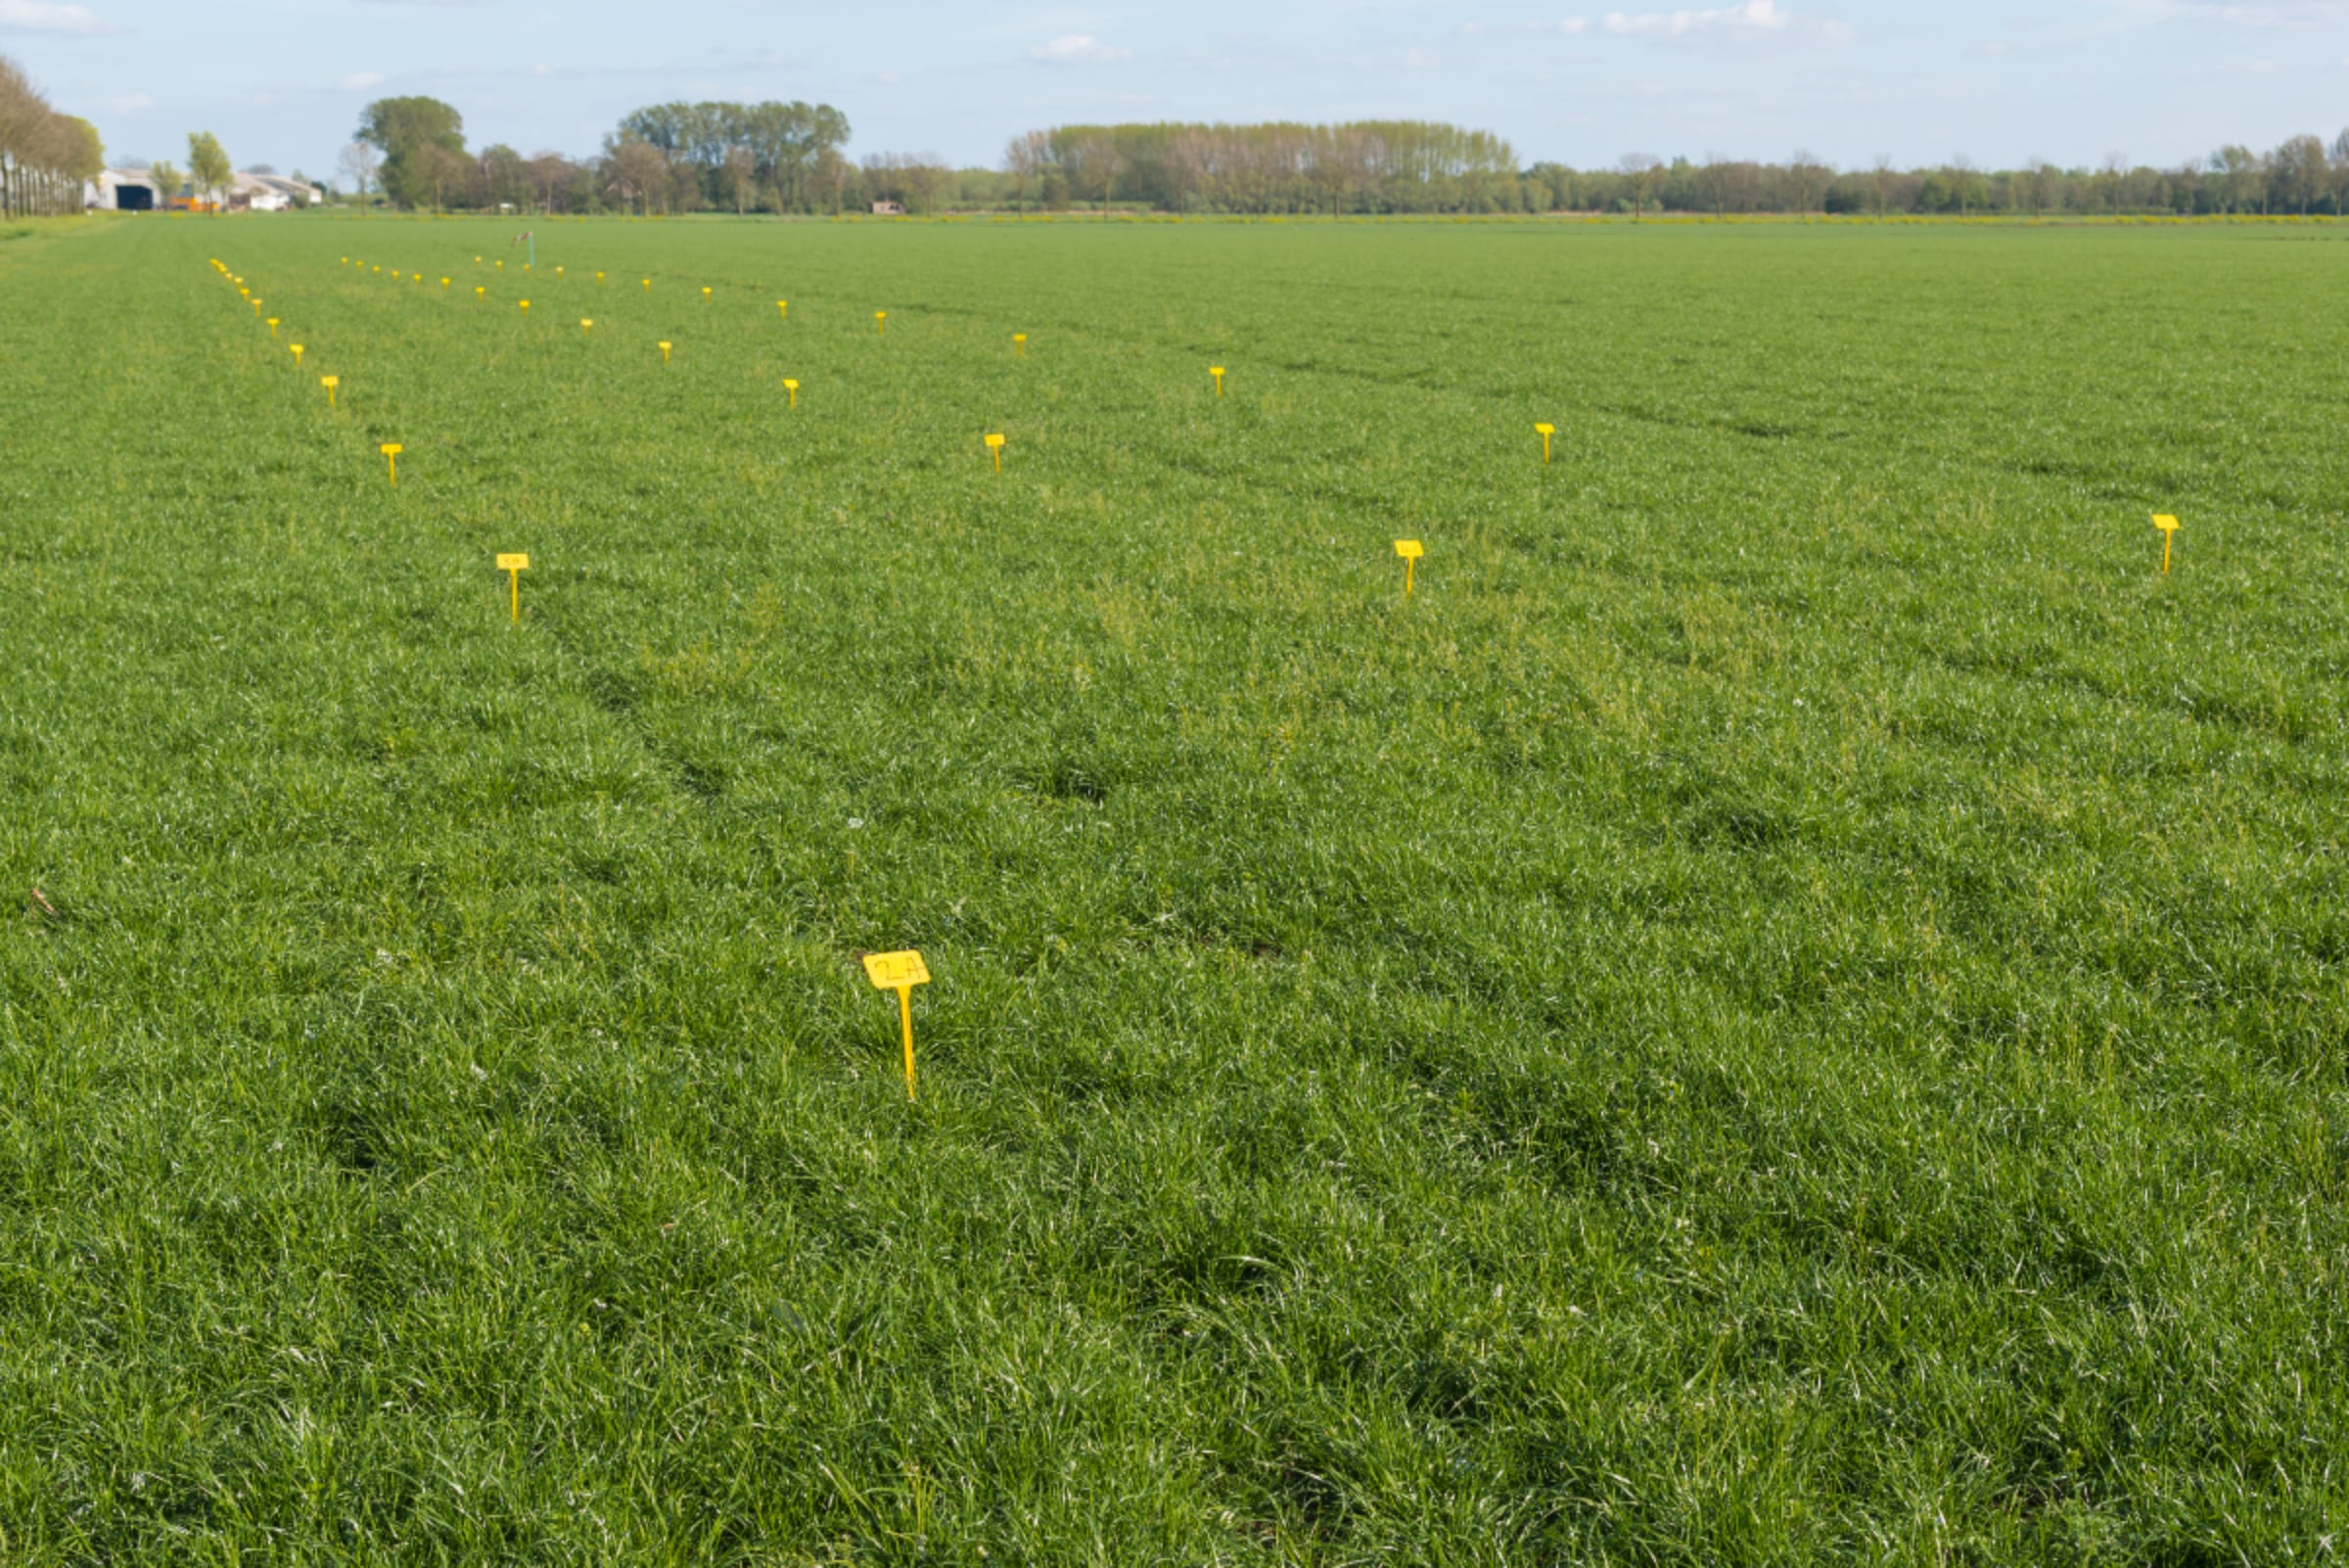 ‘One Trial is No Trial’: The Importance of Field Trials for New AgTech